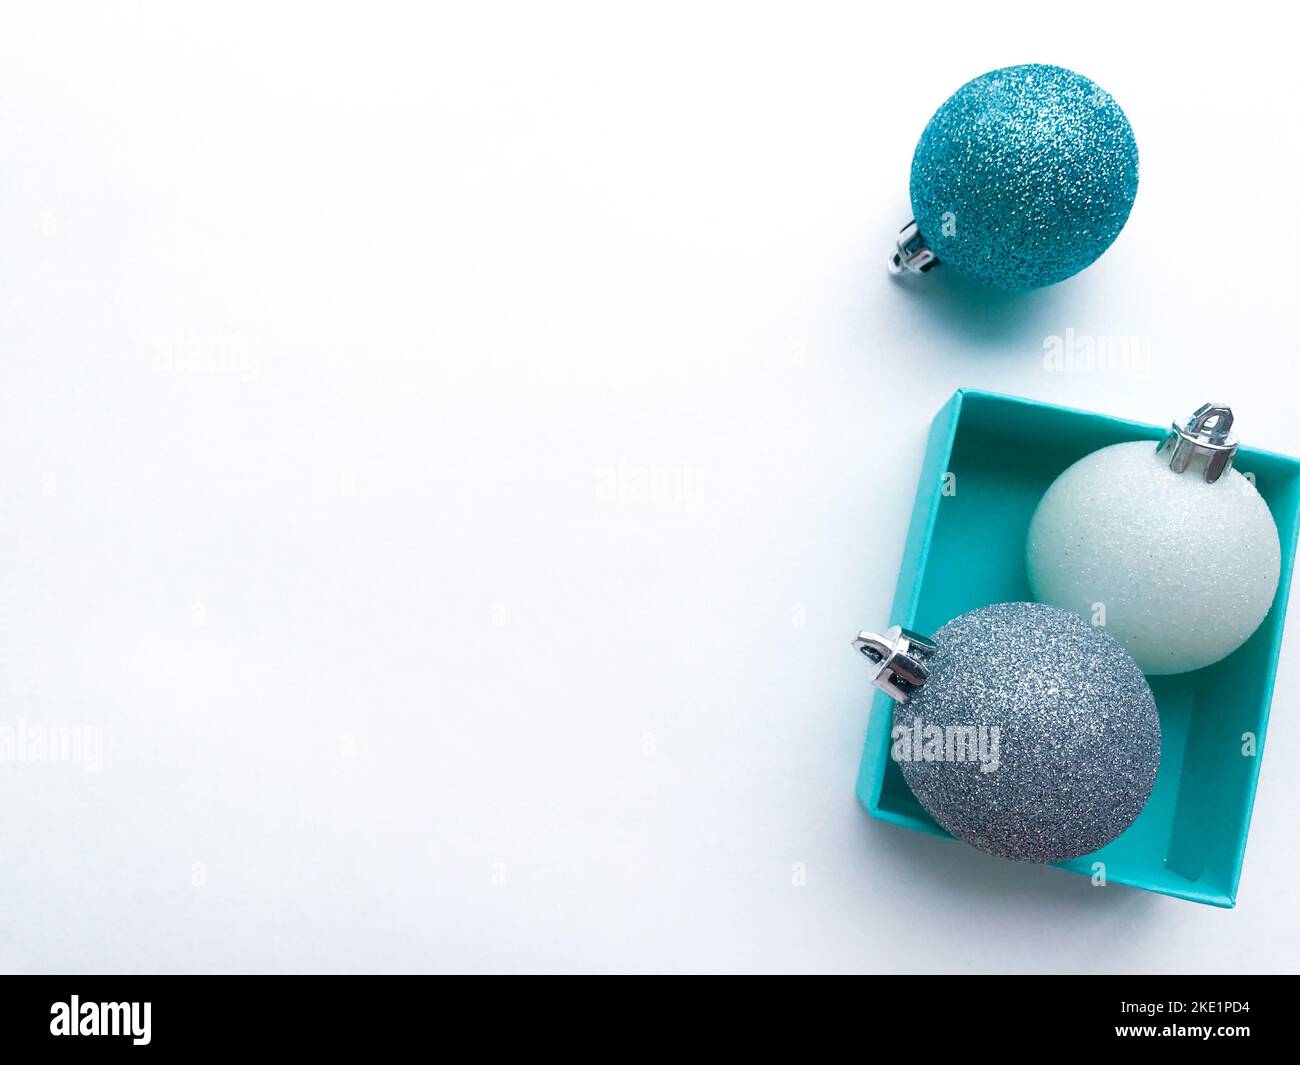 Turquoise jewel boxes inside of which is a shiny Christmas balls white, blue and silver color on the right. White background. Copy space. Stock Photo